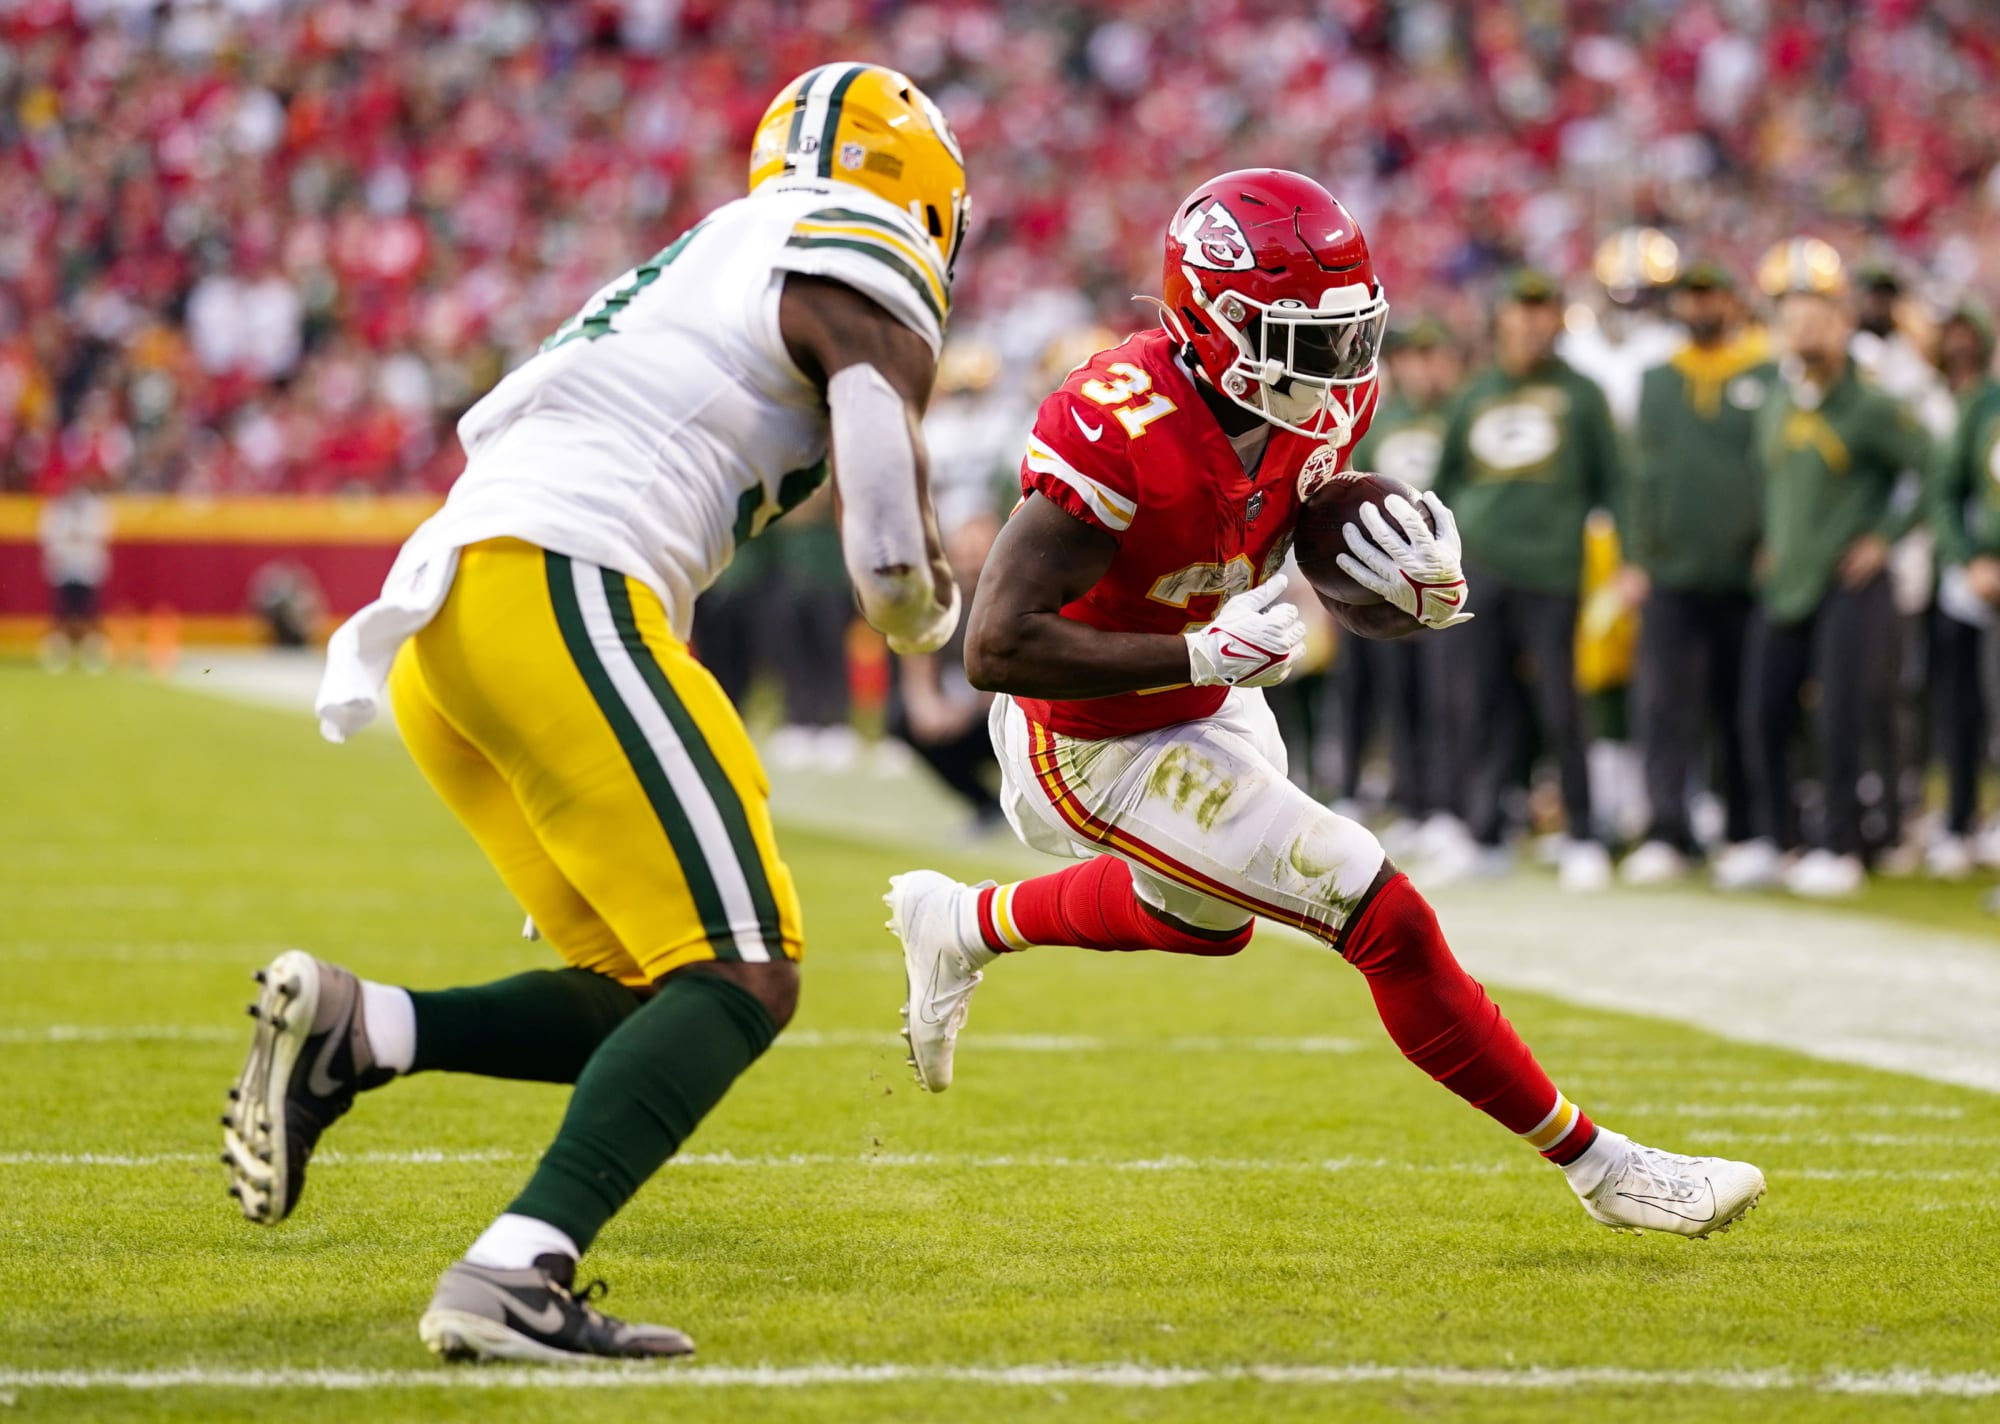 KC Chiefs vs. Packers Key takeaways from a big victory for Kansas City